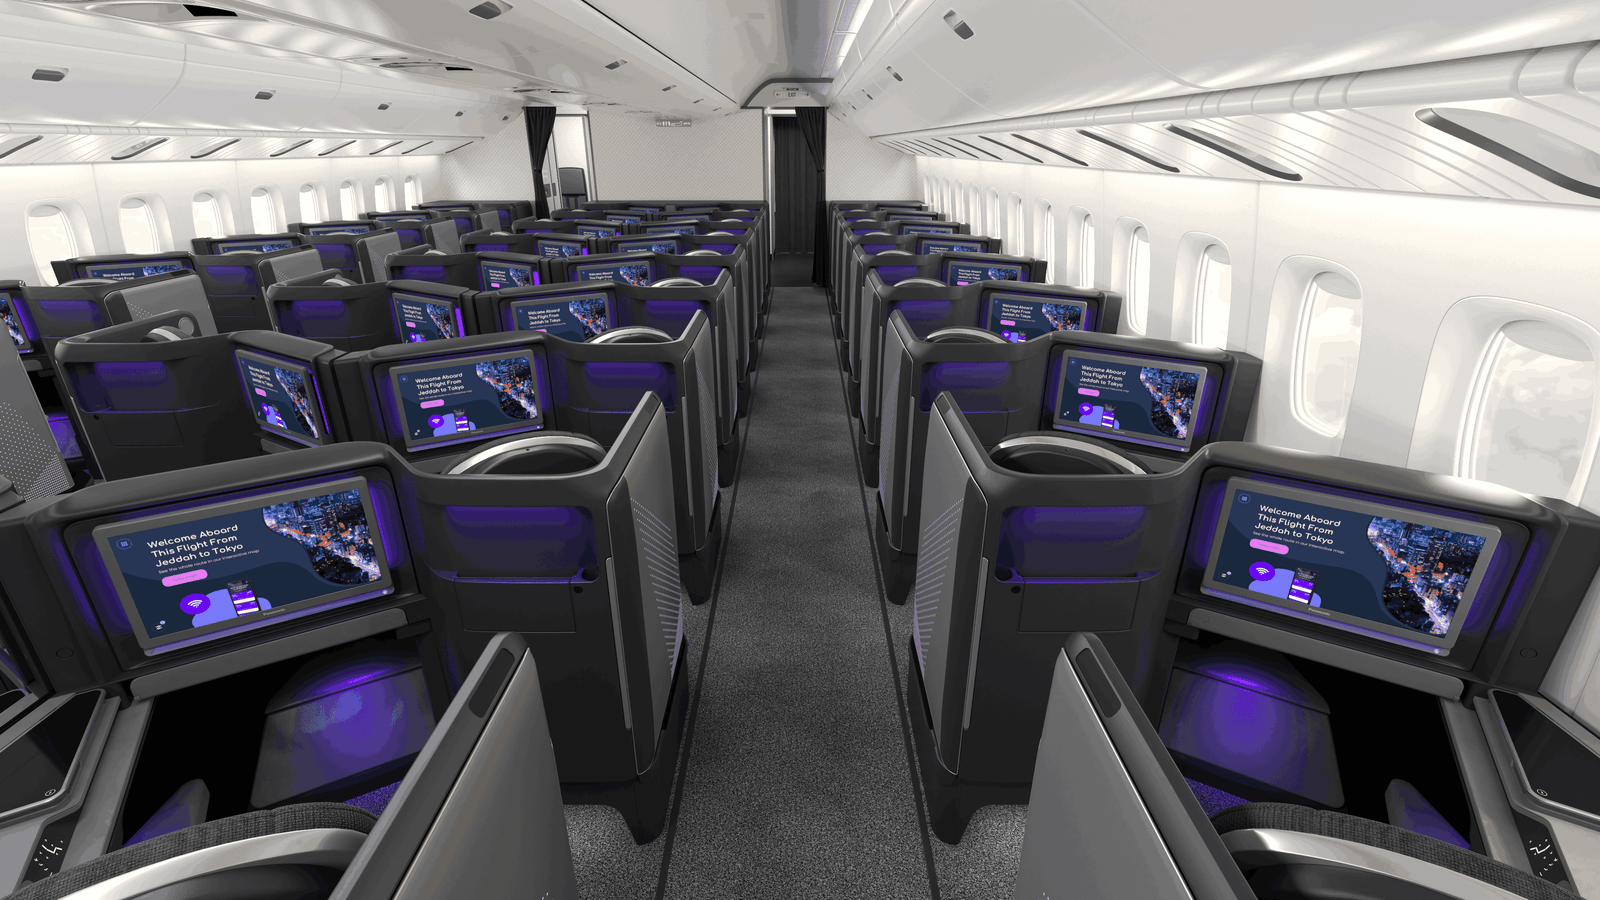 Panasonic Astrova Aircraft Interior CGI Renders by Neutral Digital – Business Day